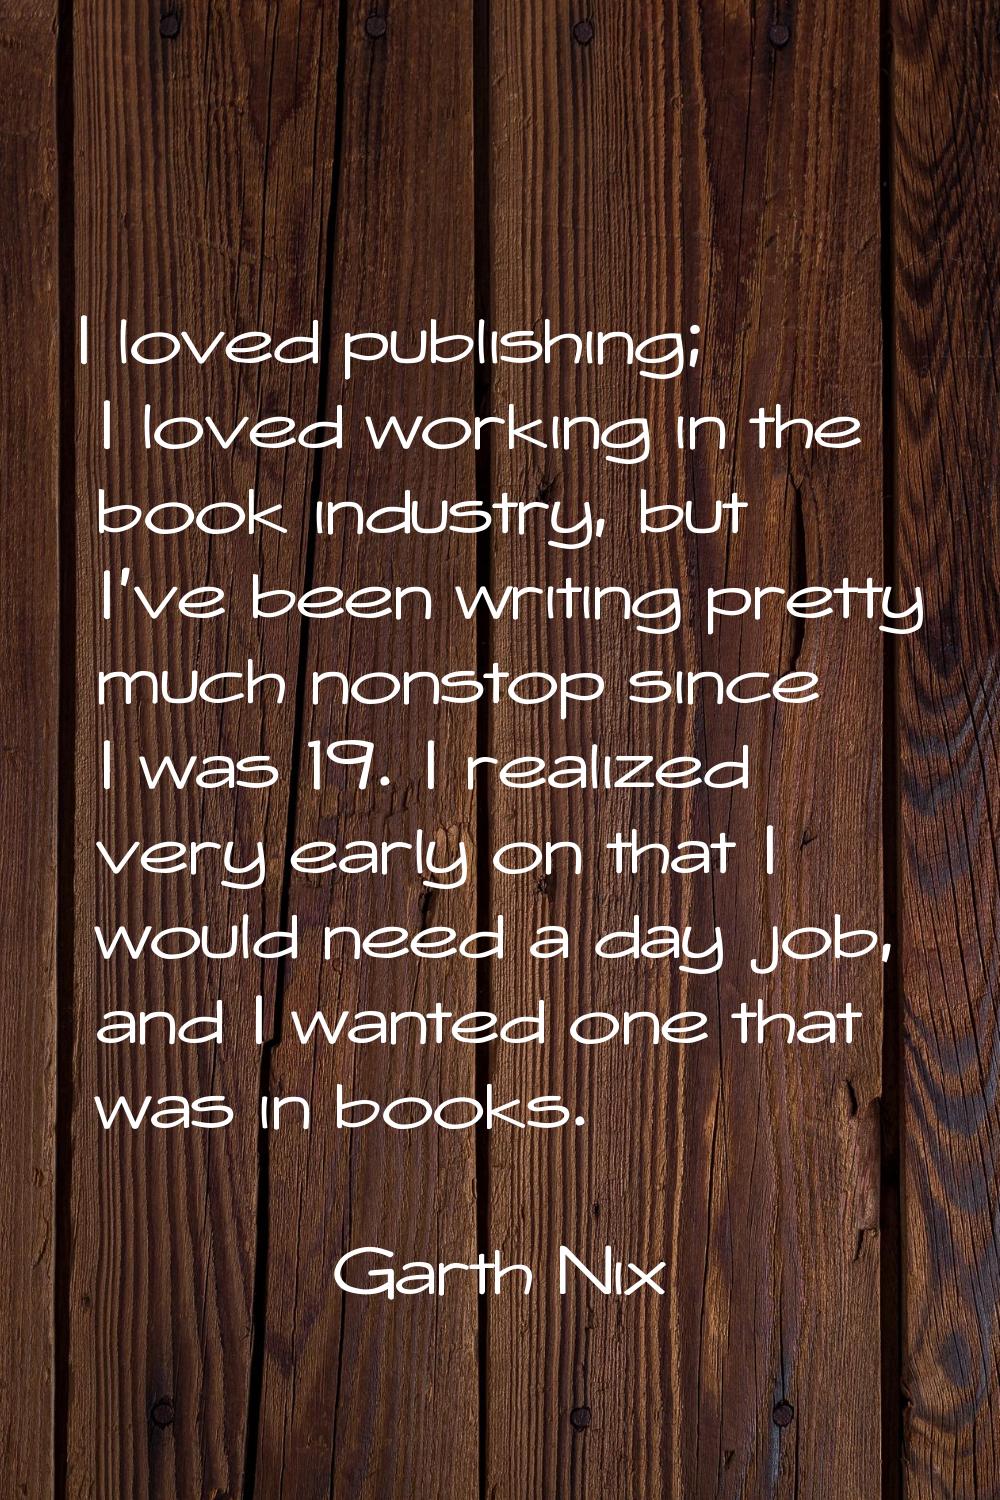 I loved publishing; I loved working in the book industry, but I've been writing pretty much nonstop